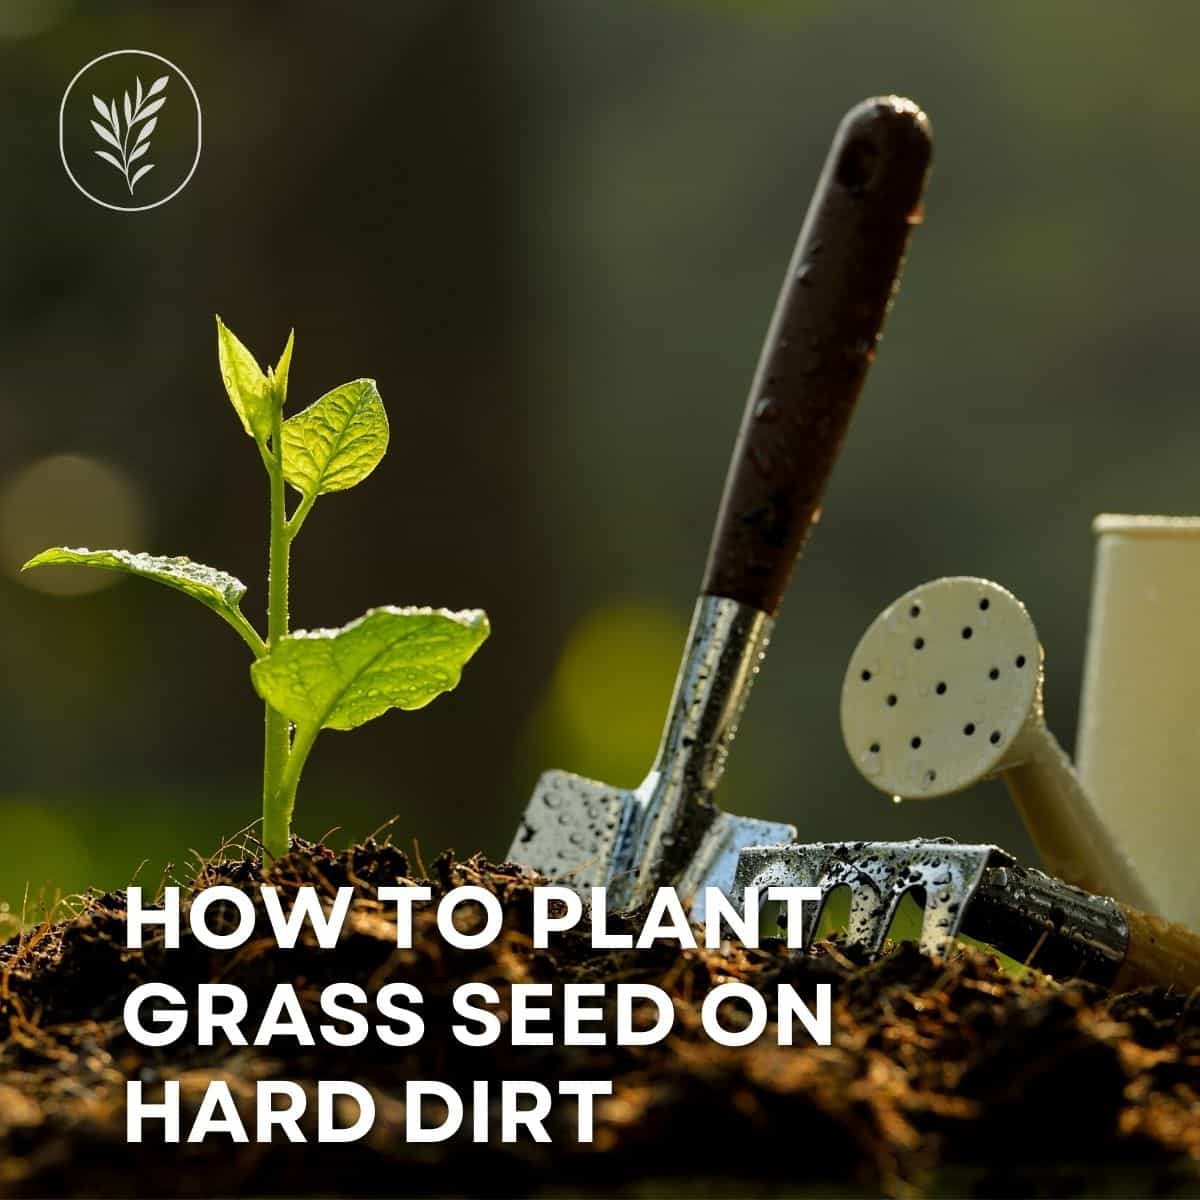 How to plant grass seed on hard dirt via @home4theharvest